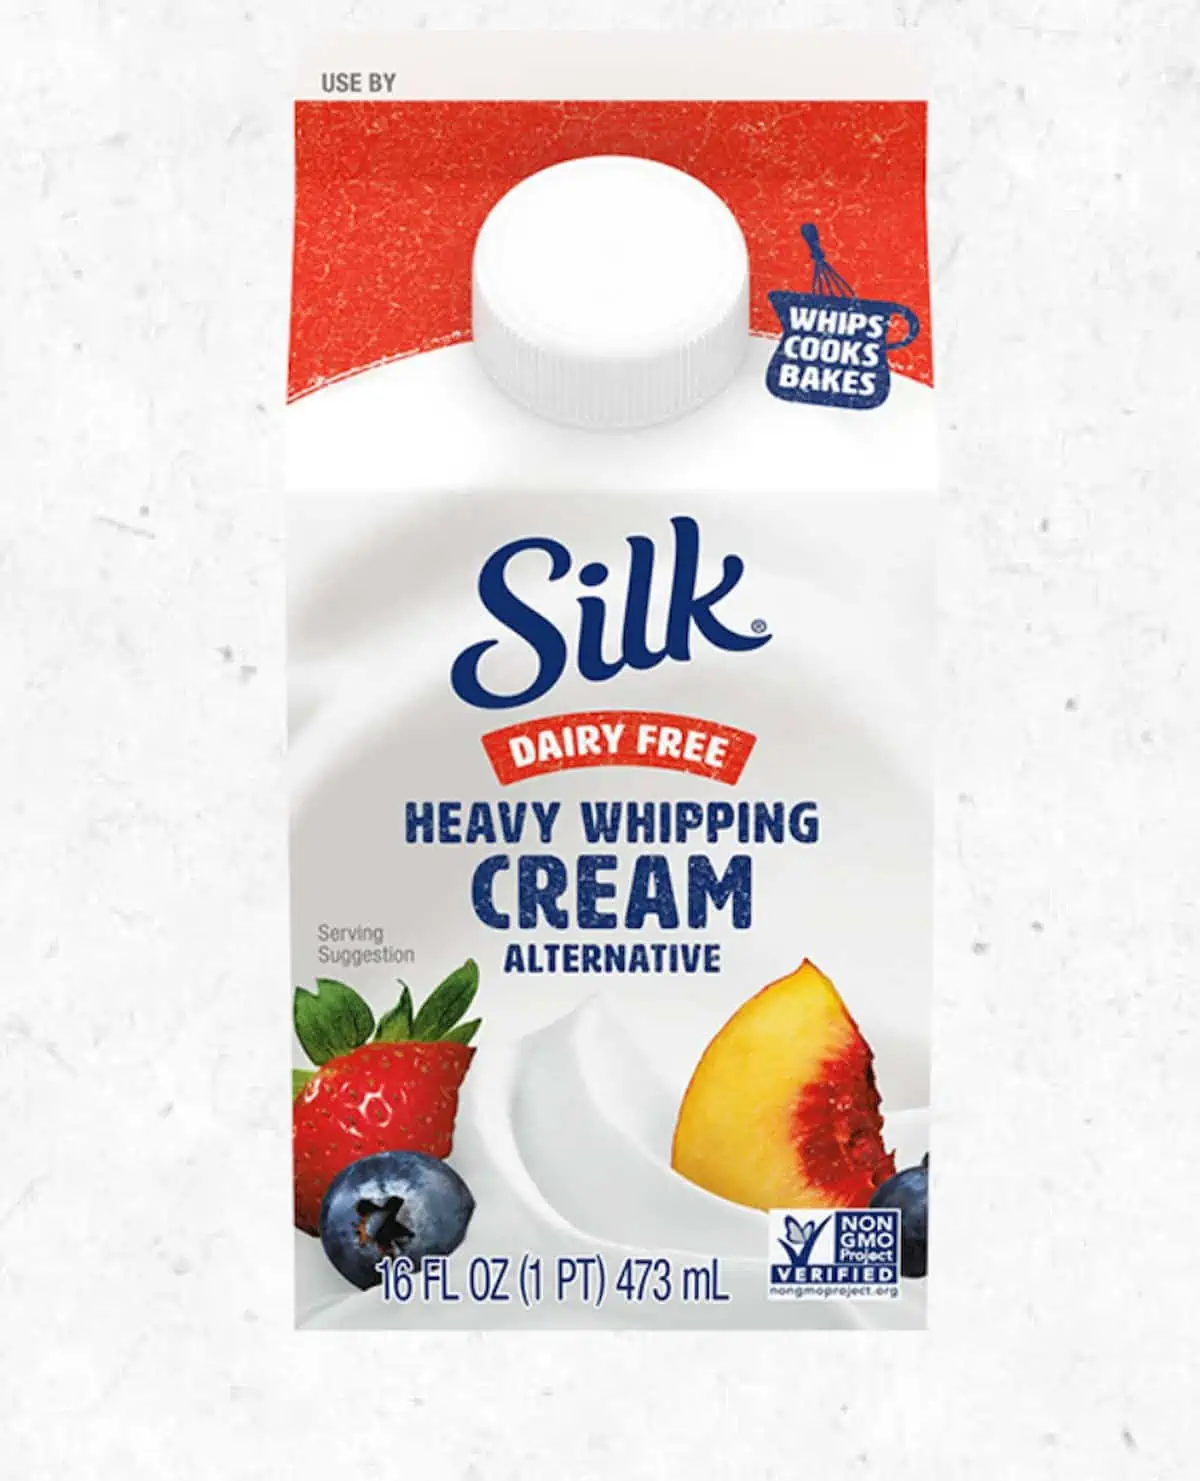 A carton of Silk's Dairy-Free Heavy Whipping Cream.